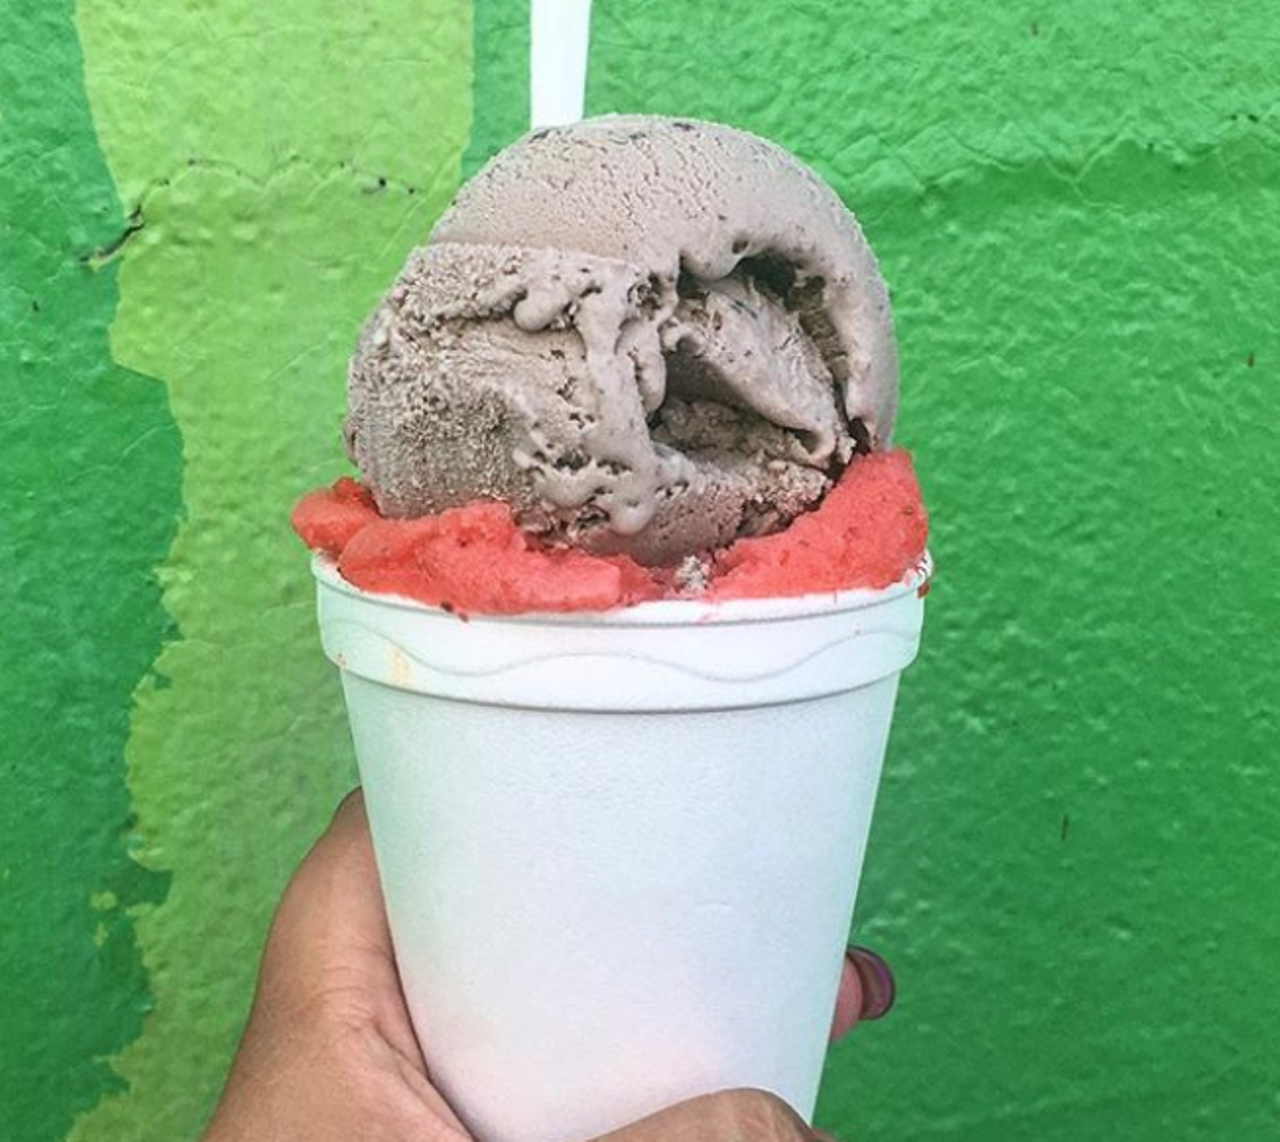 Las Nieves Fruit Cups & More
1118 W Hildebrand Ave, (210) 785-0601, lasnieves.net
While raspas reign supreme here, you can definitely enjoy ice cream too. From cones to sundaes, there’s no shortage of ice cream options. But why not get the best of both worlds? Ask for a scoop of ice cream in your raspa and just live your best life.
Photo via Instagram / lavidayessi